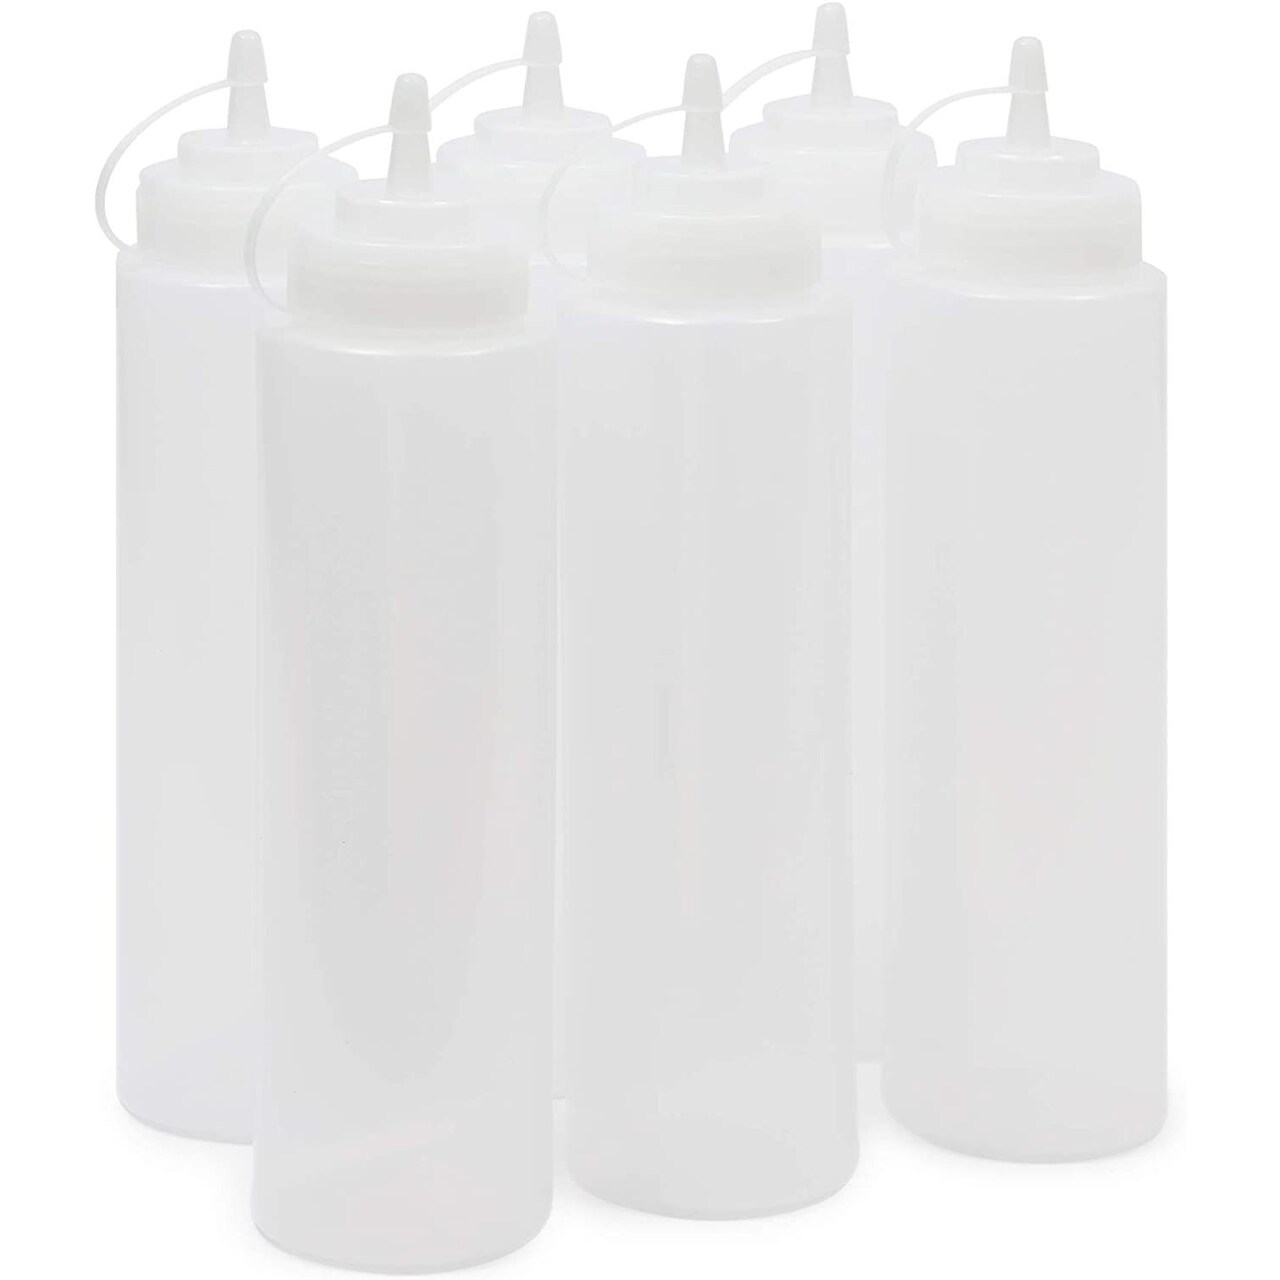 6 Pack 24 oz Plastic Condiment Squeeze Bottles with Caps, Empty Squirt  Bottles for Ketchup, Mustard, Sauces